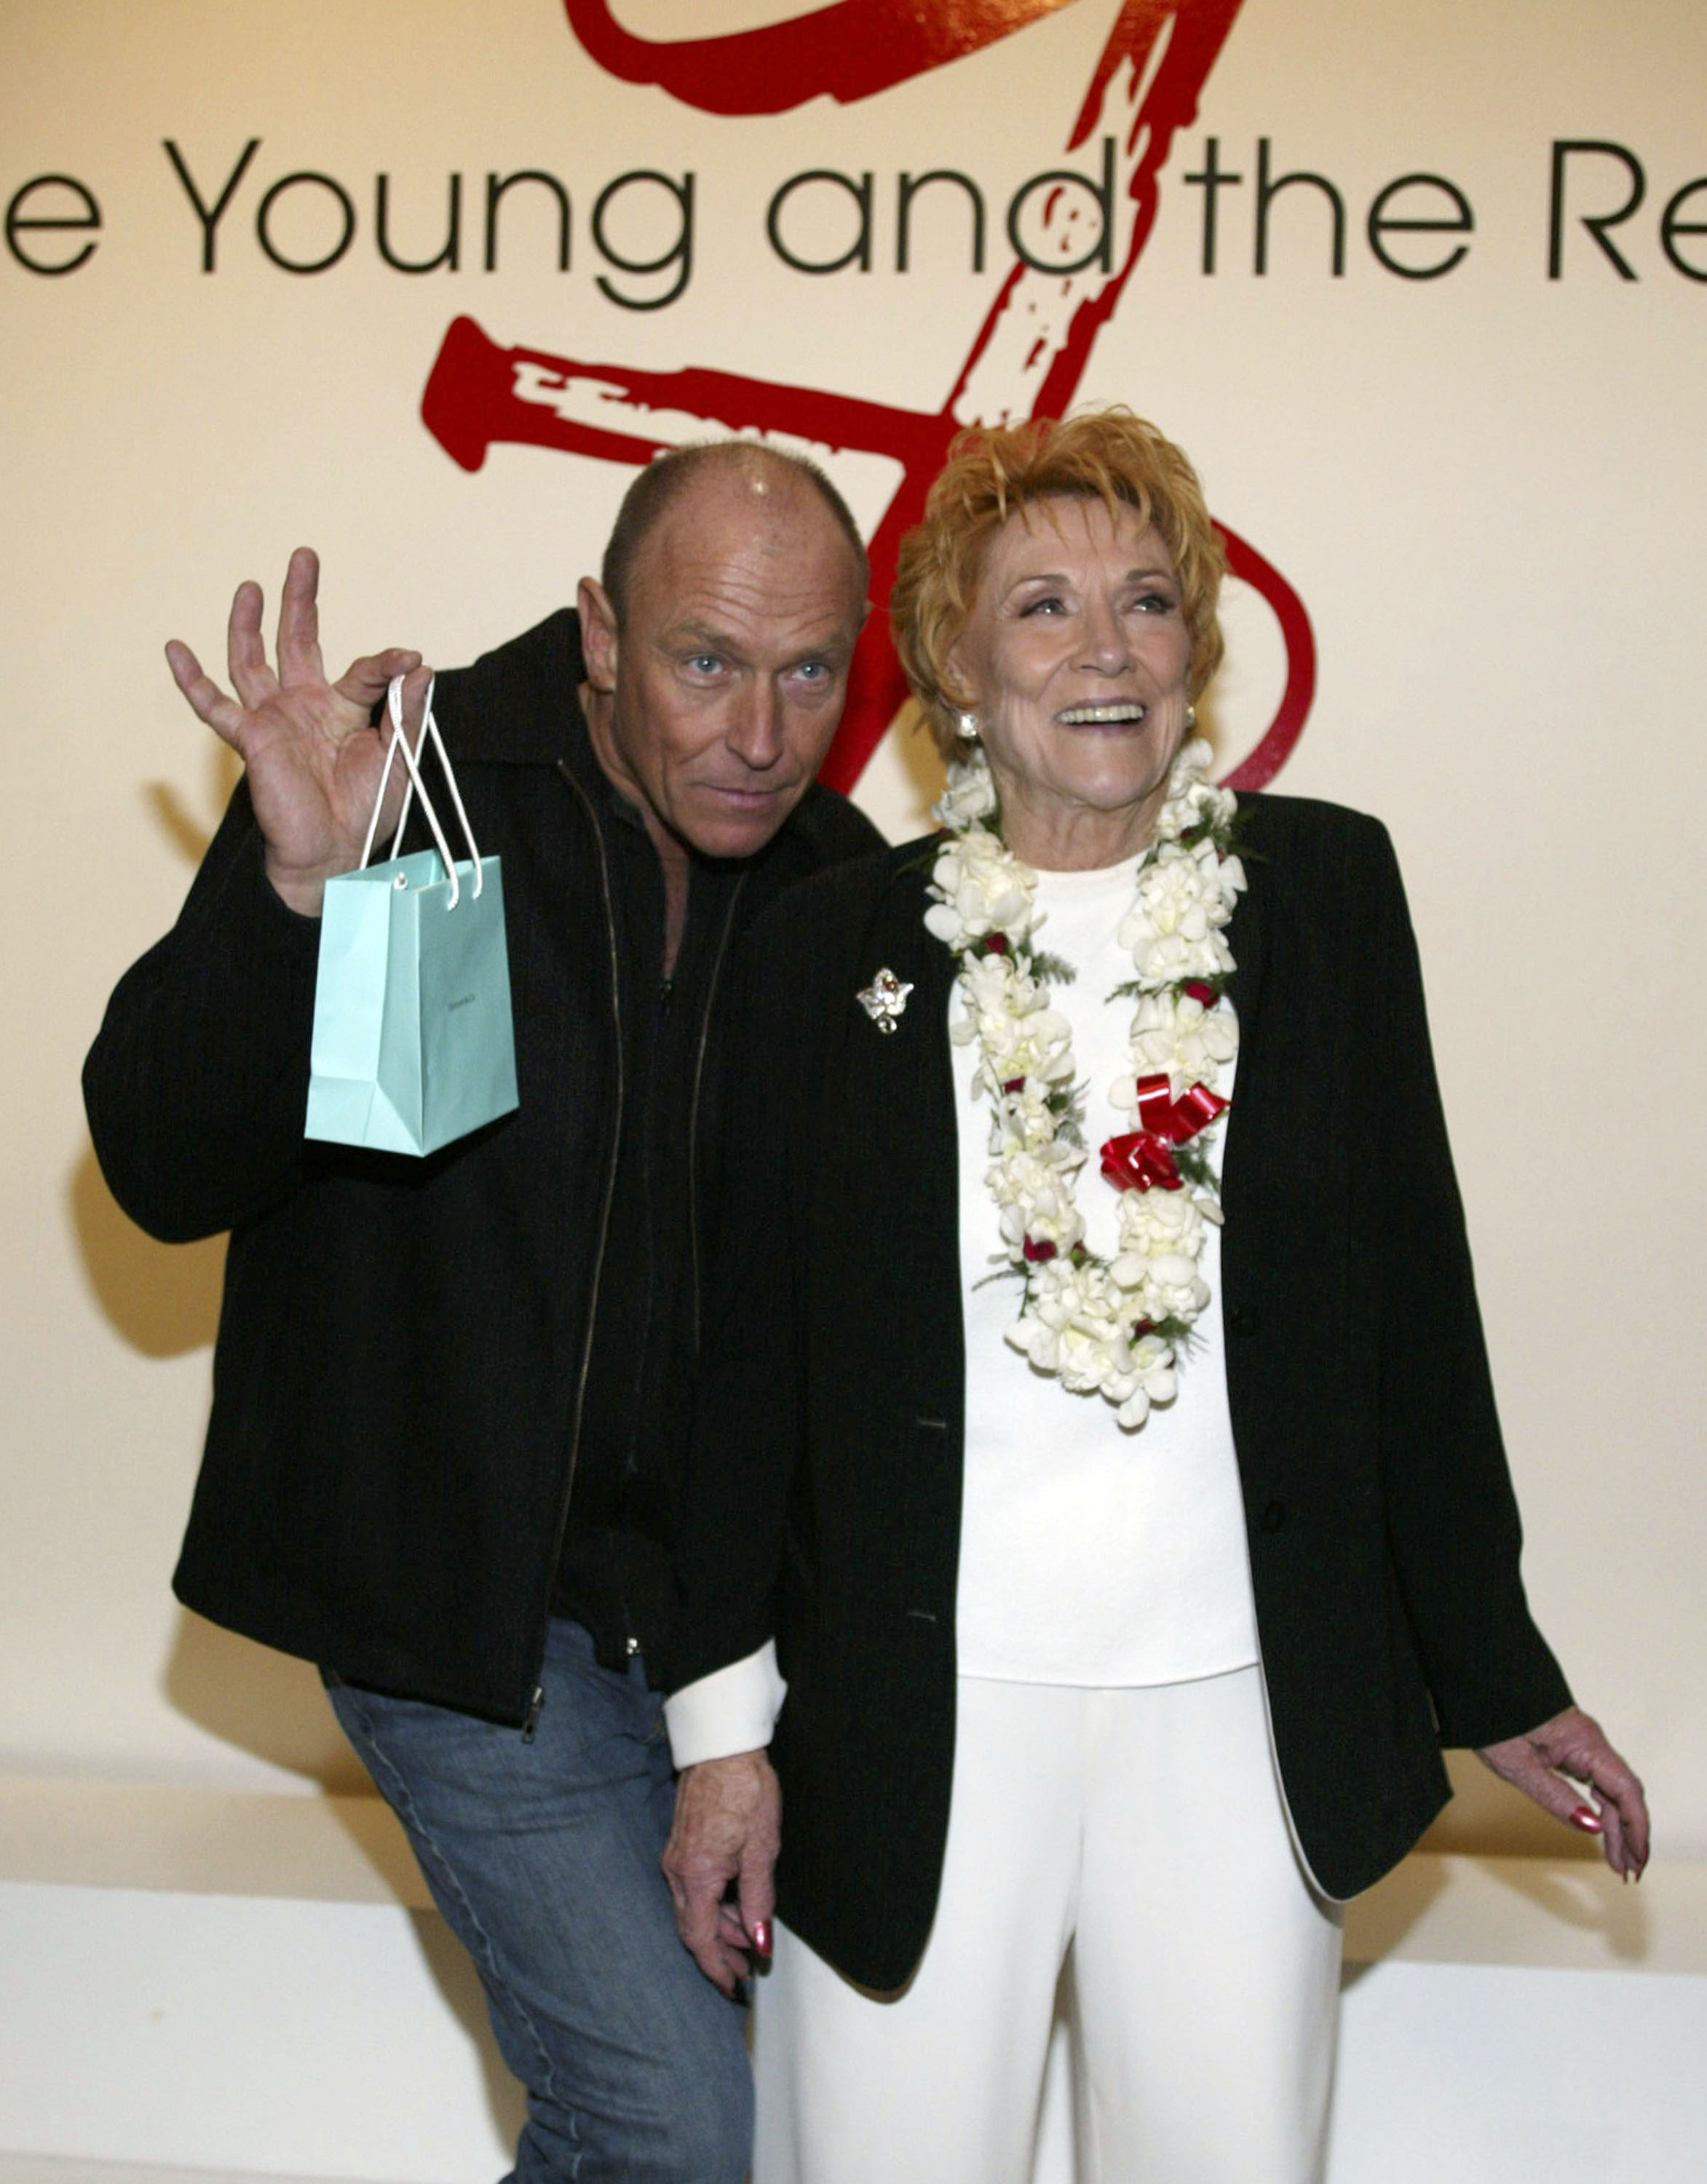 Corbin Bernsen and his mother, Jeanne Cooper, at the "The Young and the Restless" celebration for actress Jeanne Cooper's 30th year anniversary on the show at CBS Television City on January 28, 2004 in Los Angeles, California | Source: Getty Images